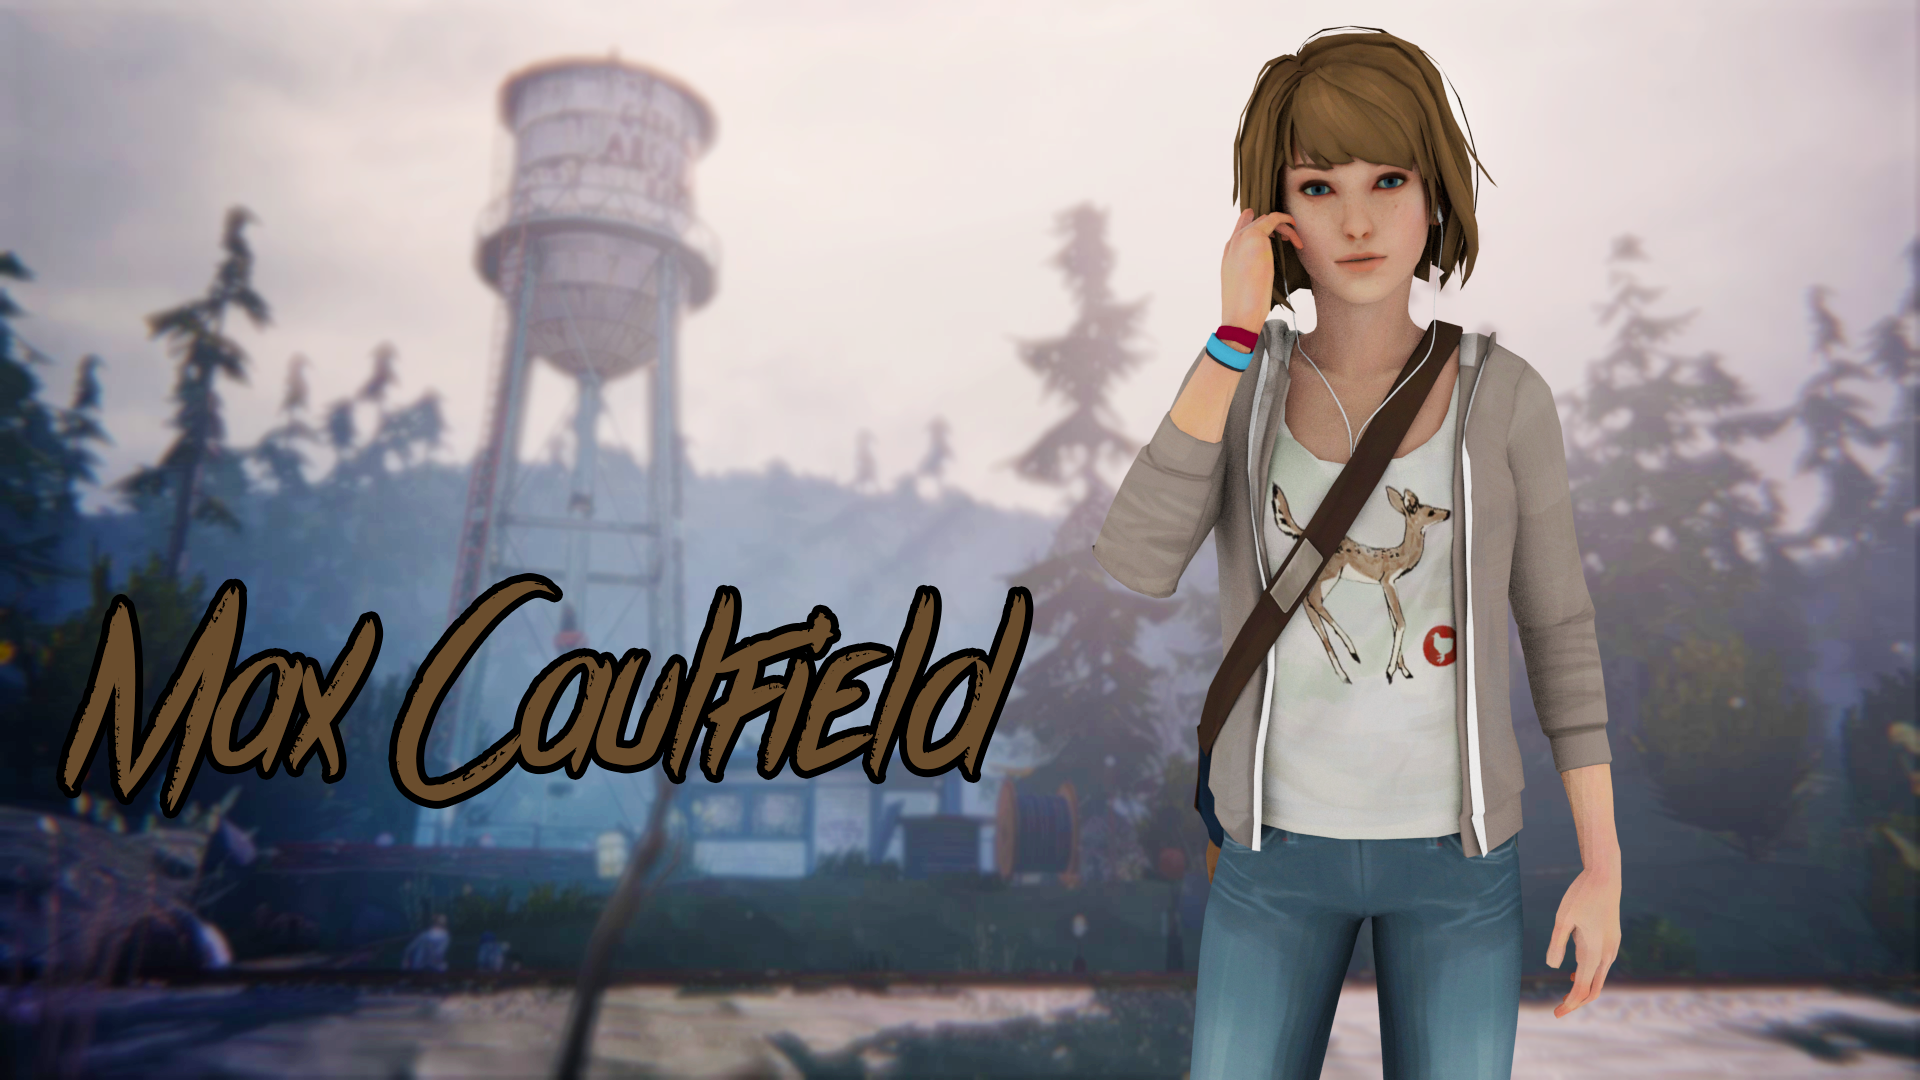 General 1920x1080 Life Is Strange Max Caulfield video games video game girls video game characters PC gaming